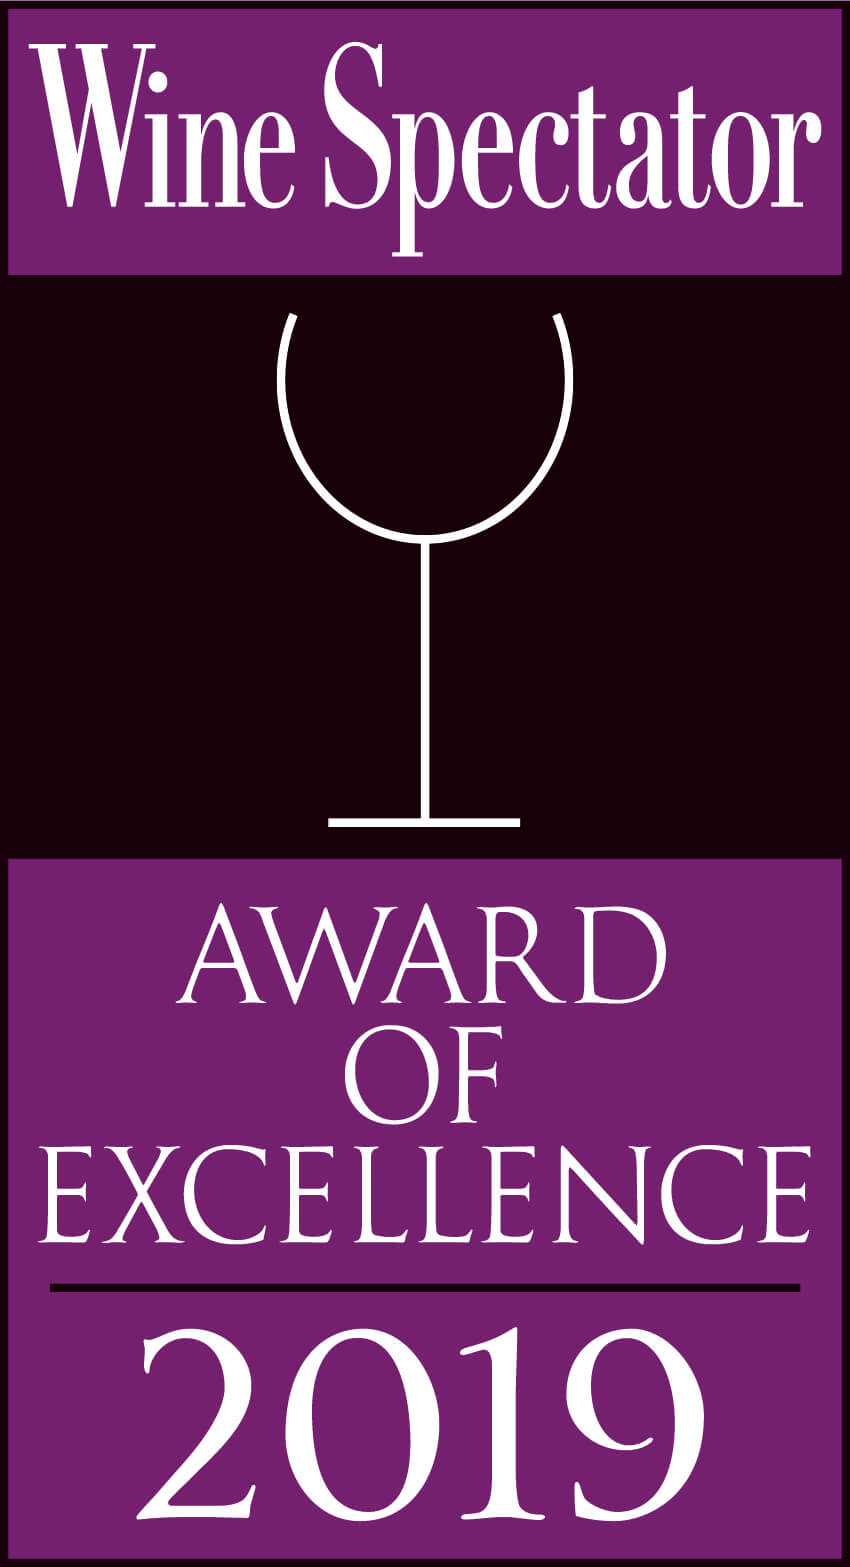 Award of Excellence